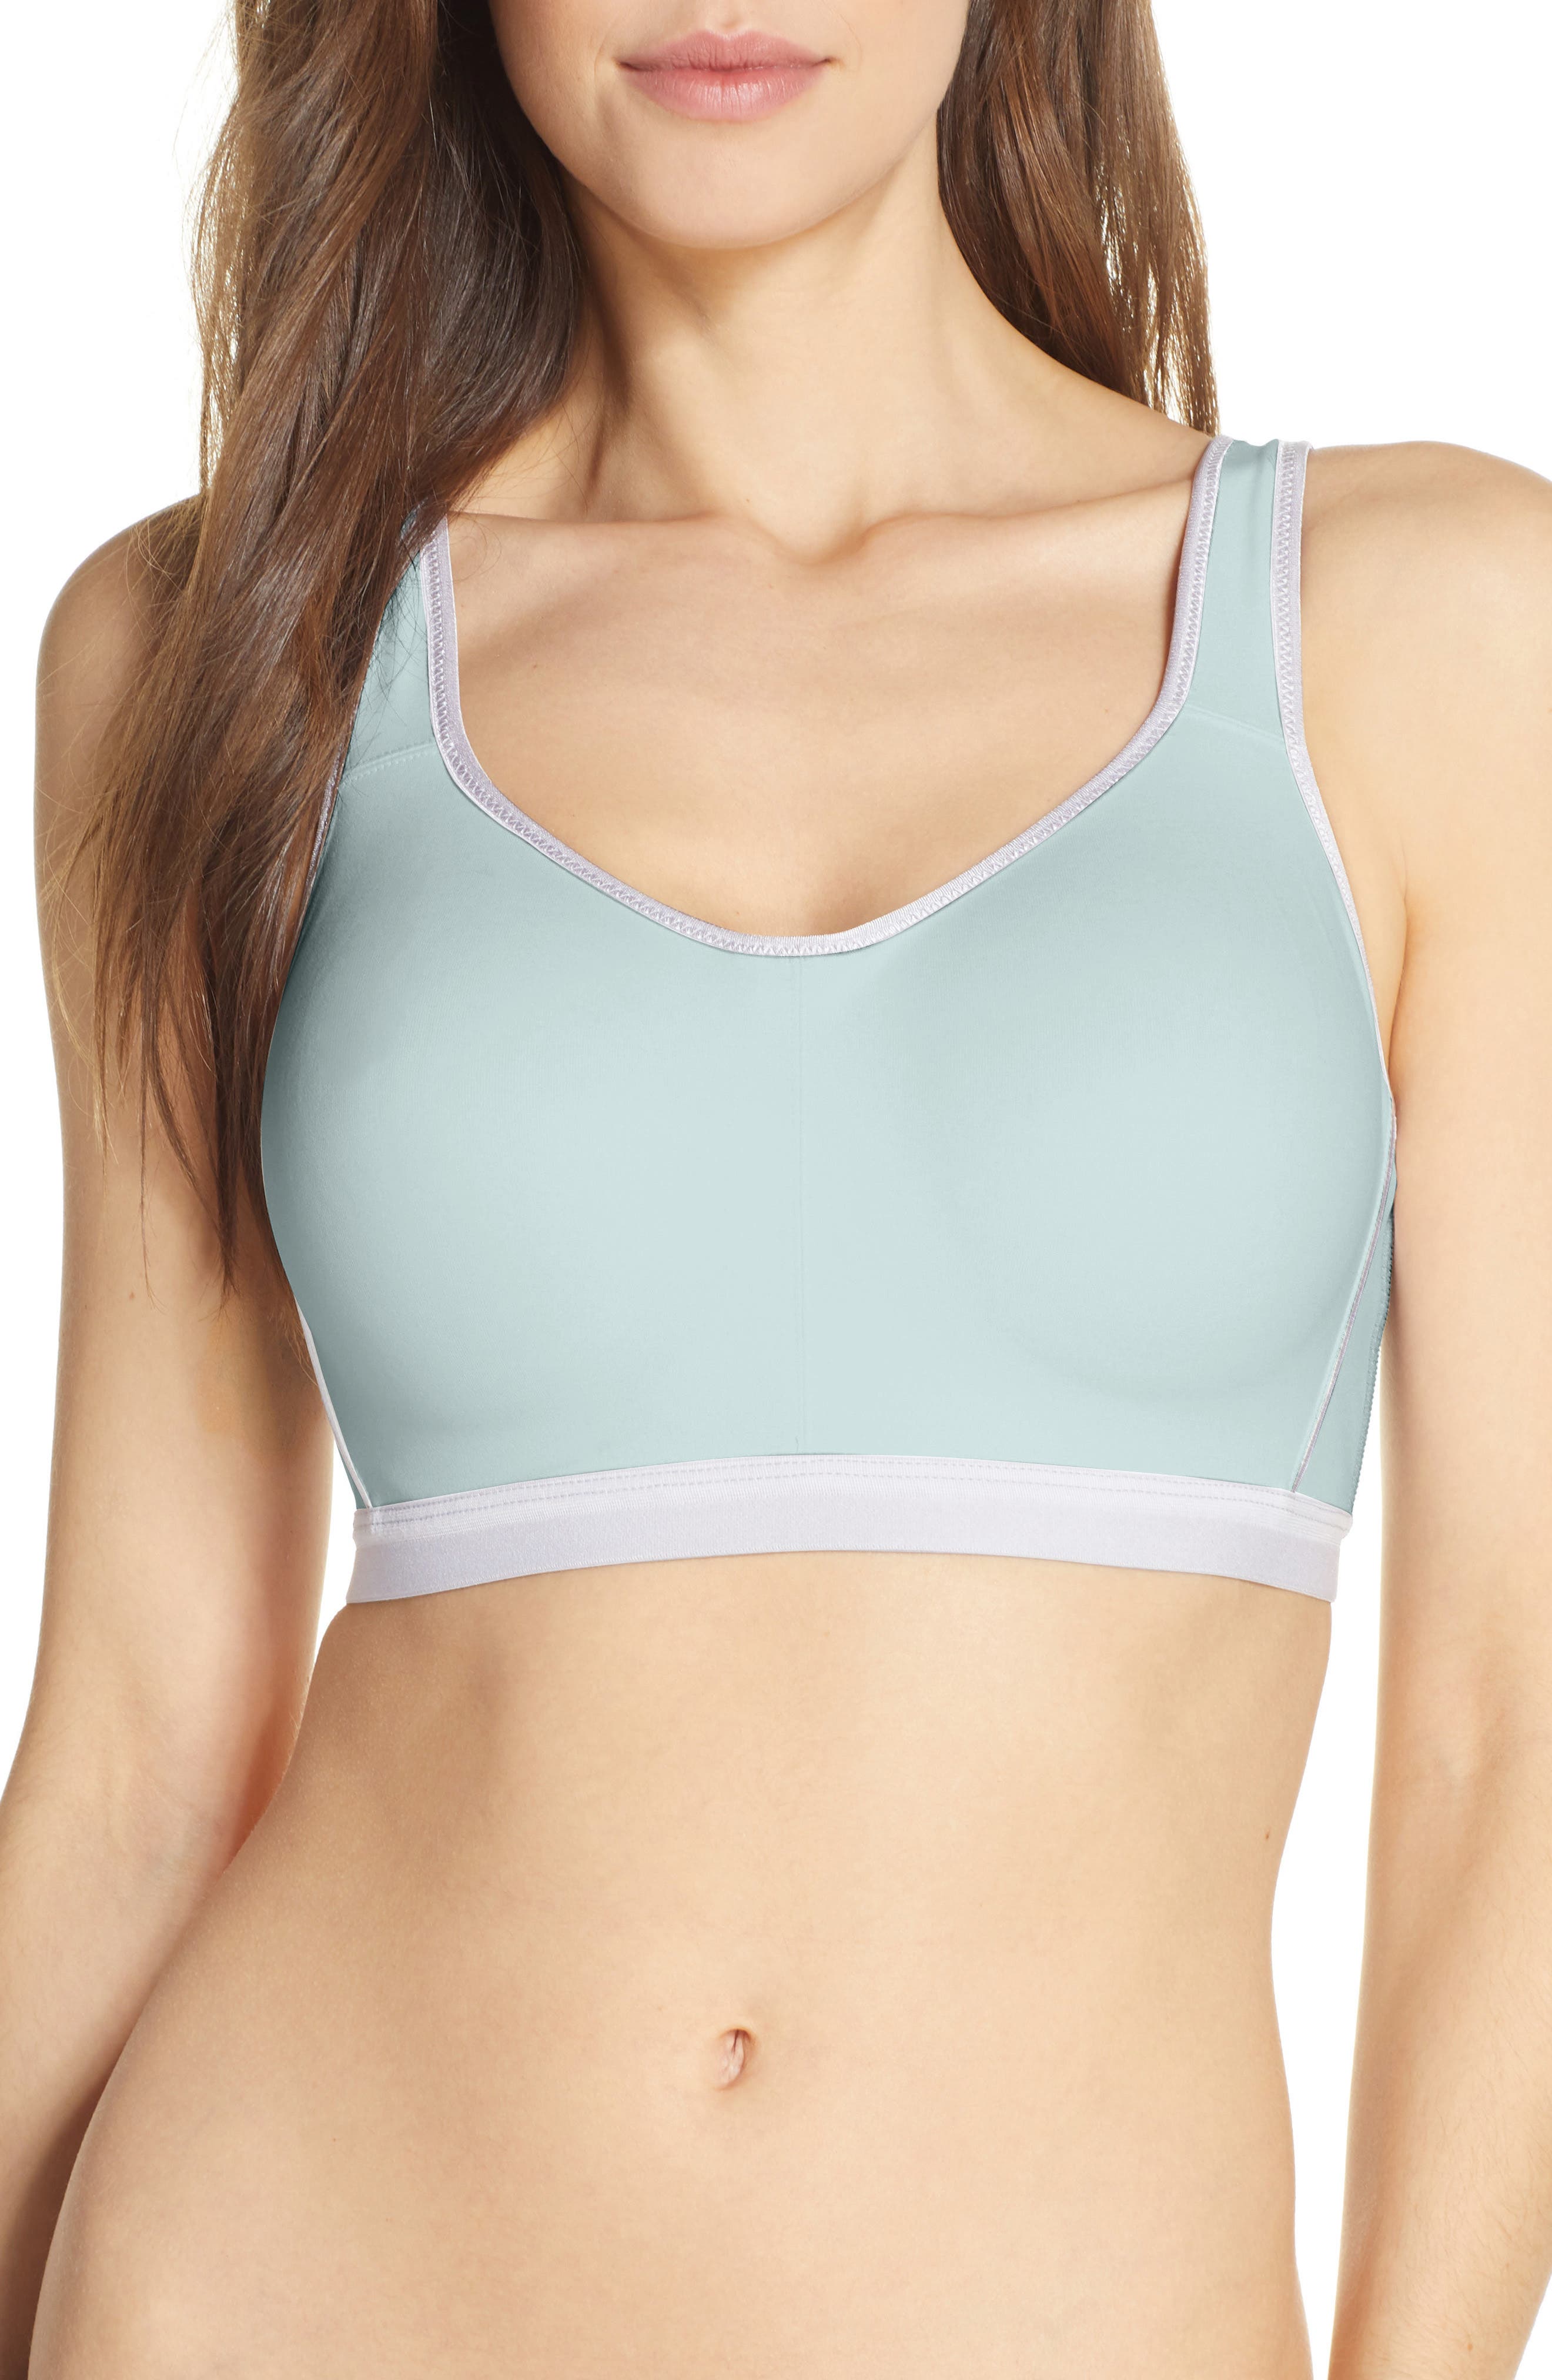 UPC 195093014413 product image for Wacoal High Impact Underwire Sports Bra, Size 38D in Ether/White at Nordstrom | upcitemdb.com